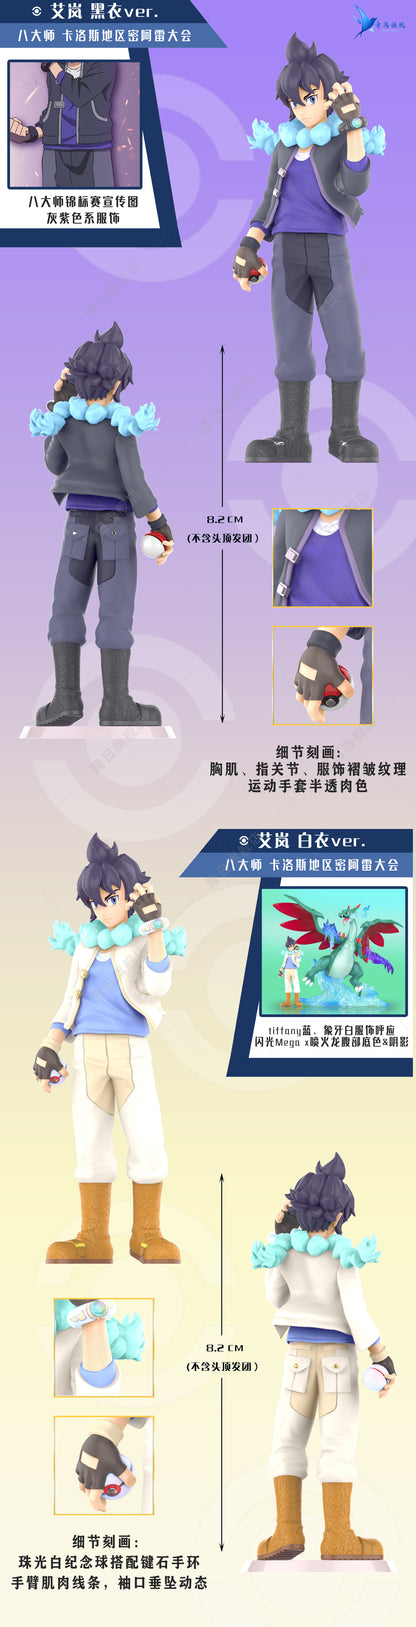 〖Sold Out〗Pokemon Scale World World Coronation Series Alain 1:20 - Lucky Wings Studio